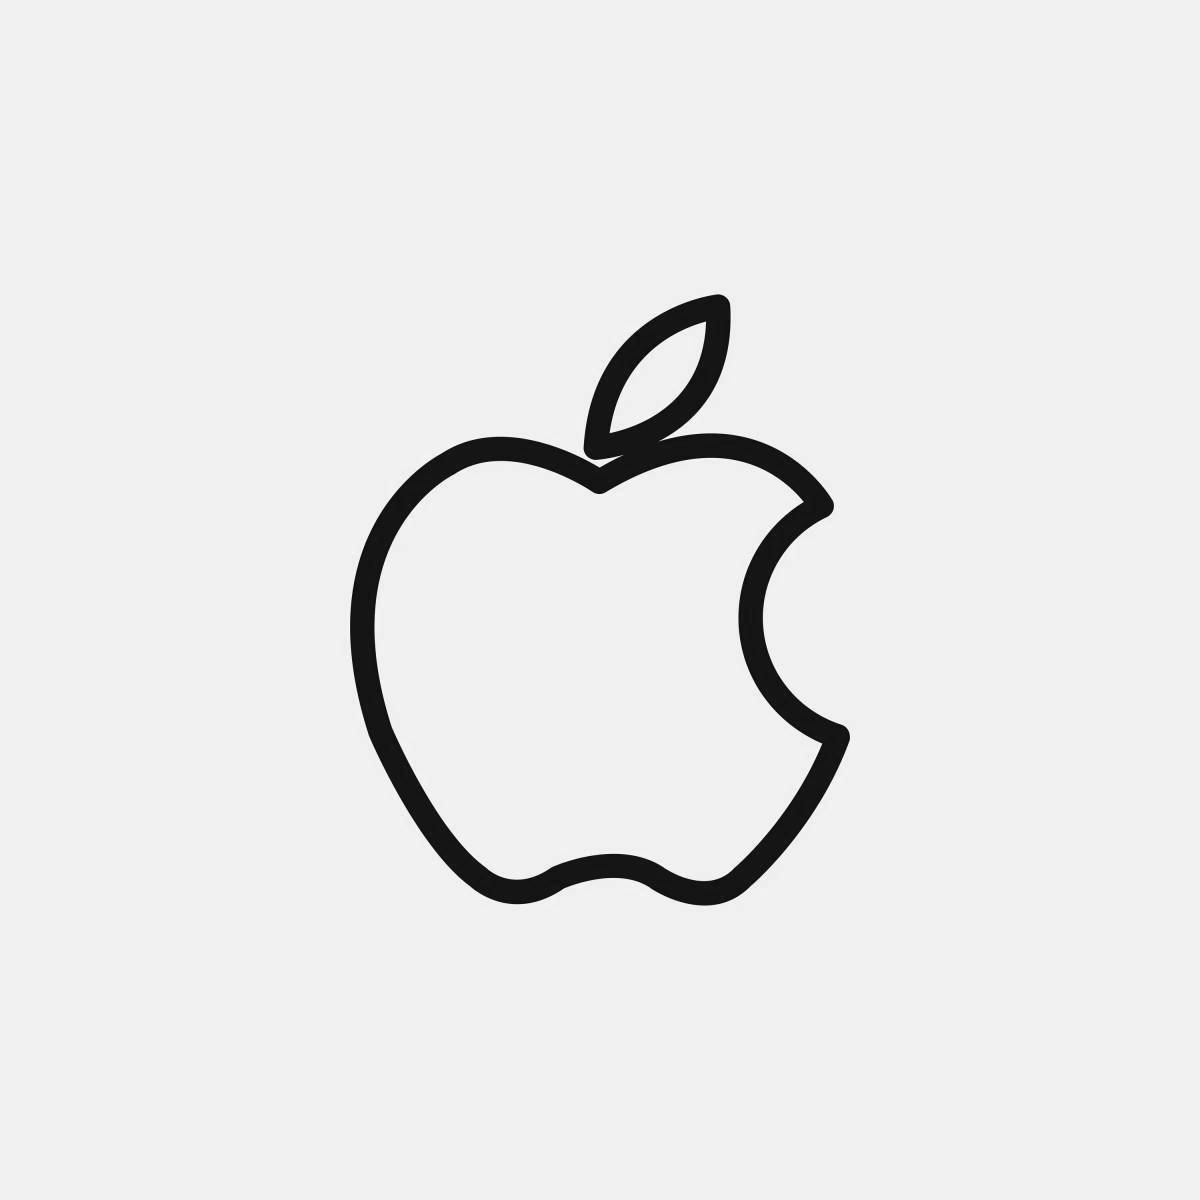 Humorous coloring of the apple icon